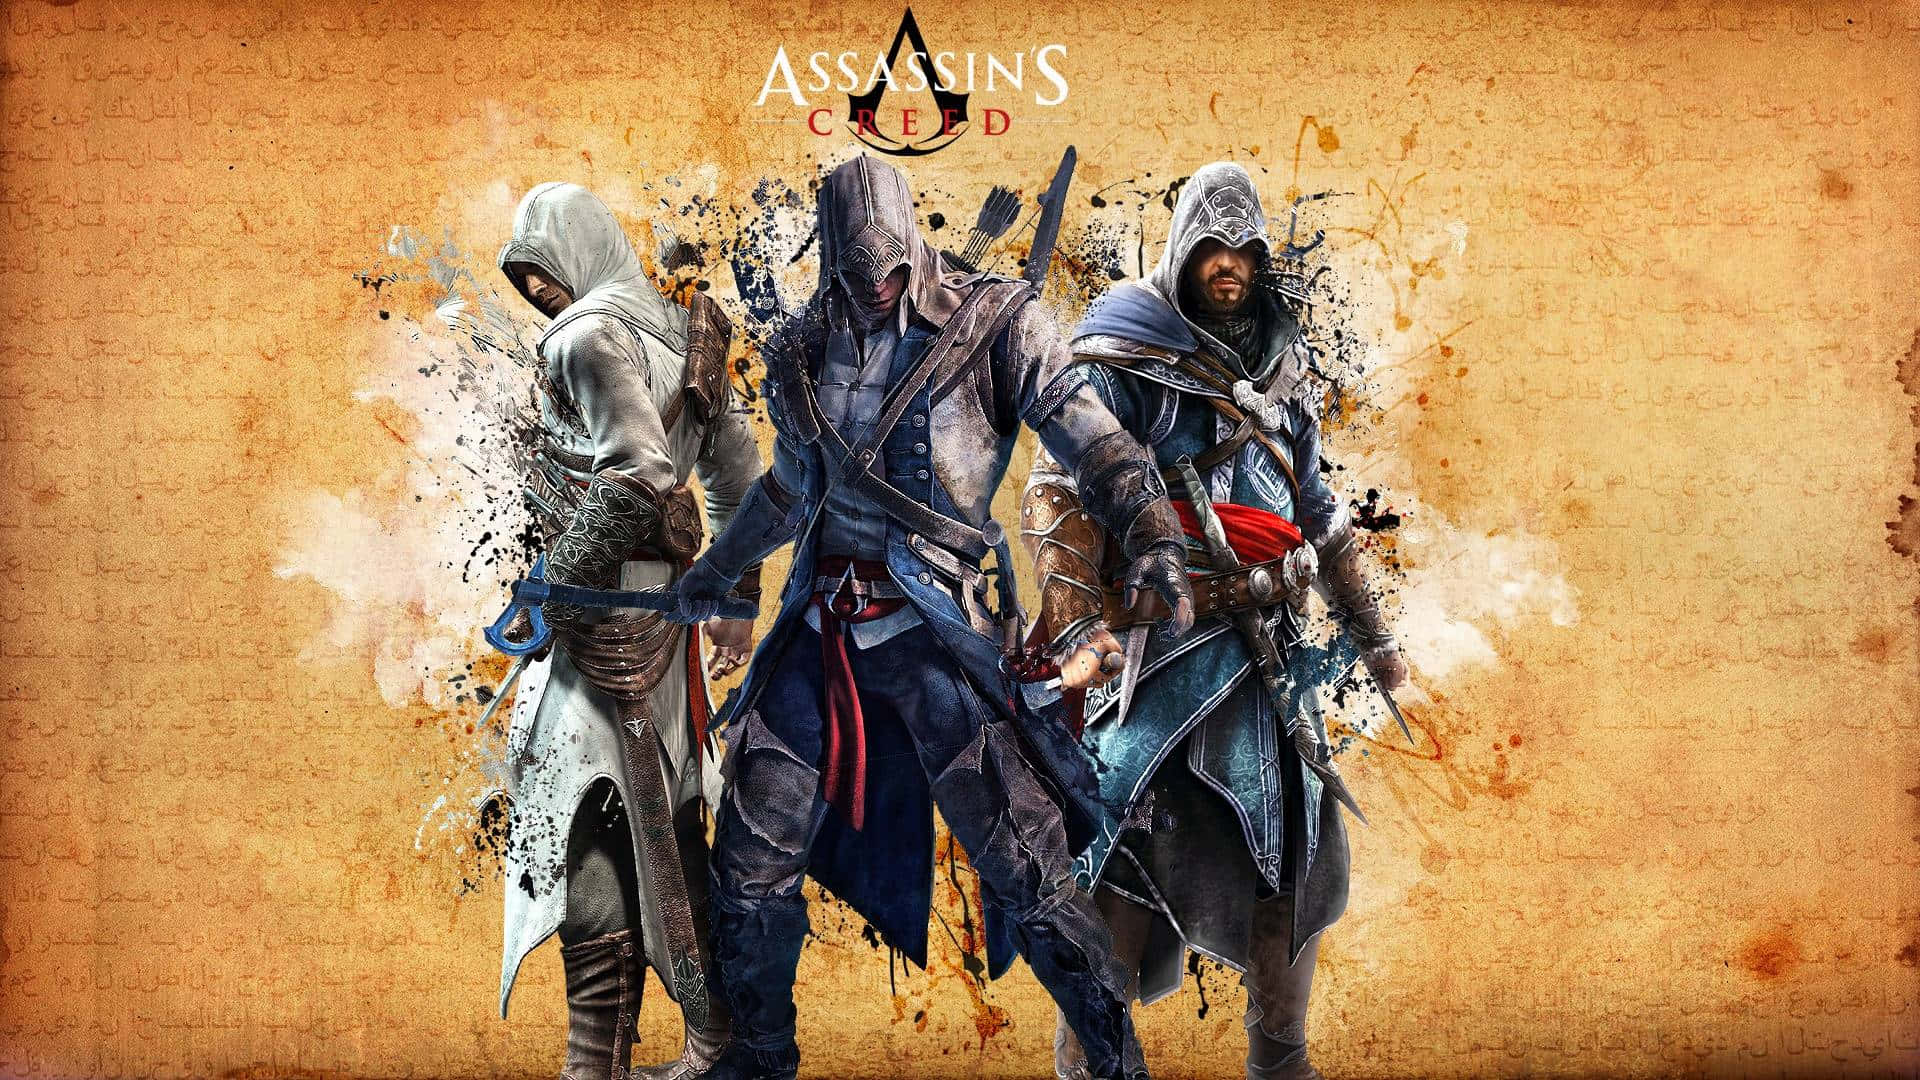 HD Video Game Assassin's Creed Wallpaper